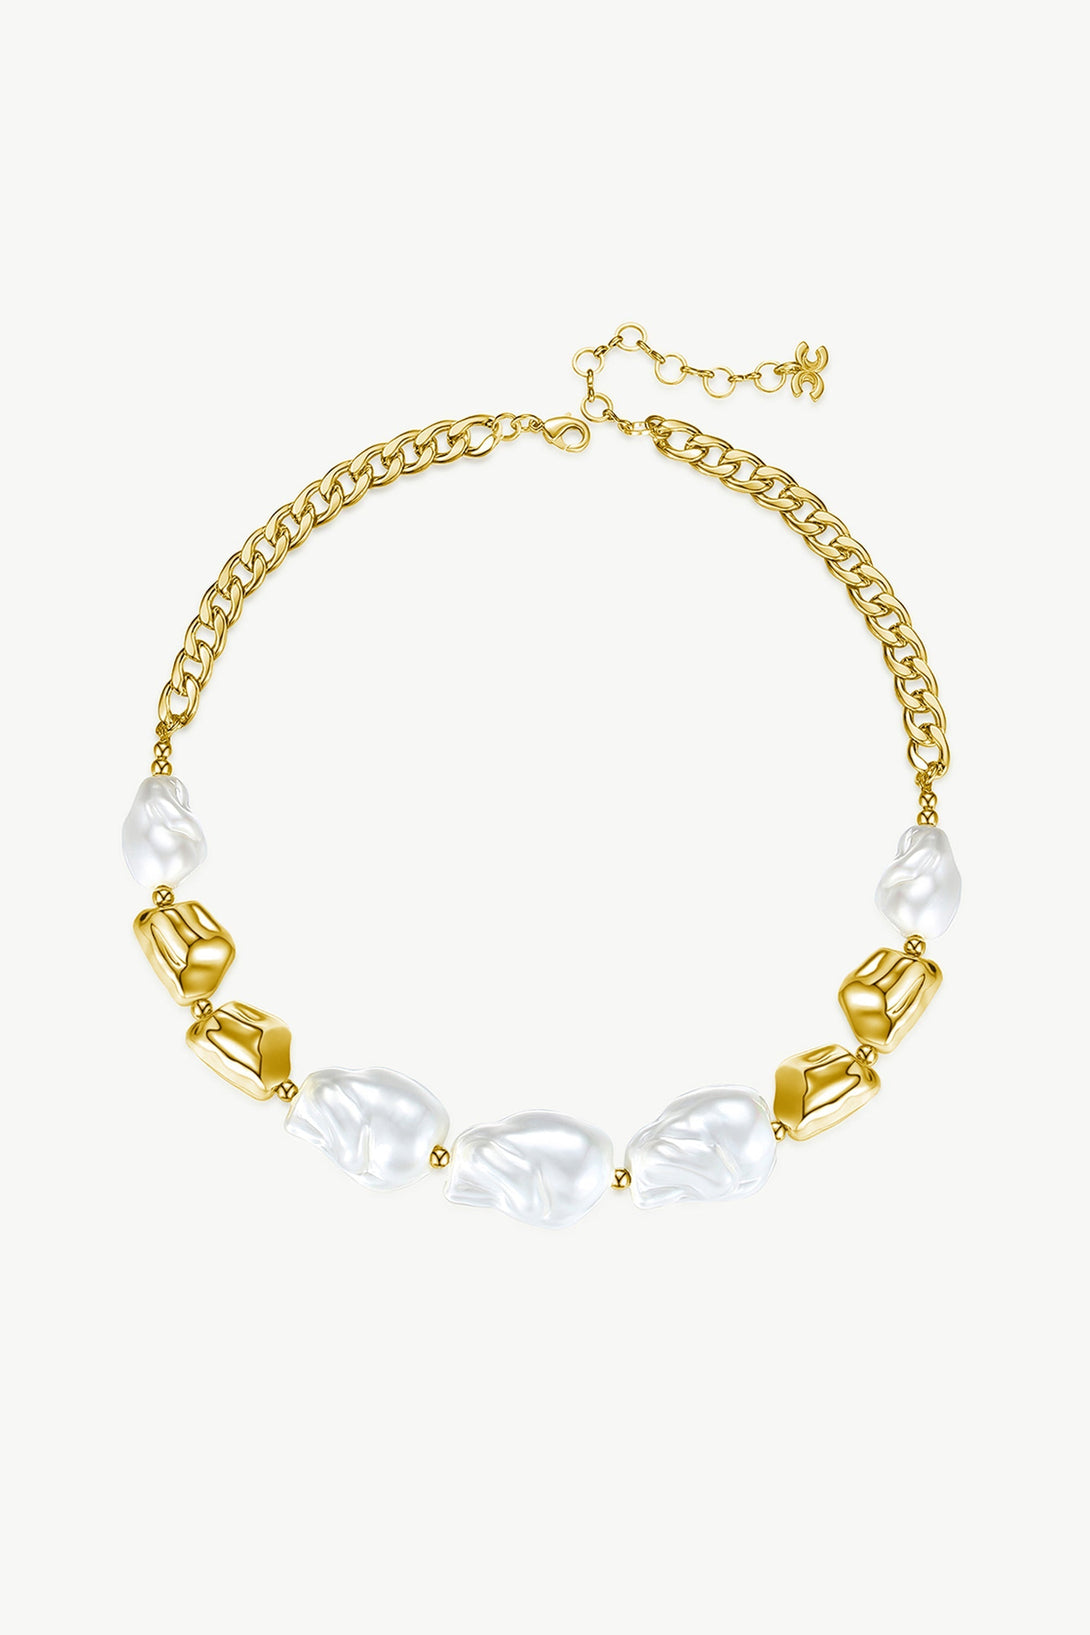 Gold Baroque Pearl Statement Necklace - Classicharms